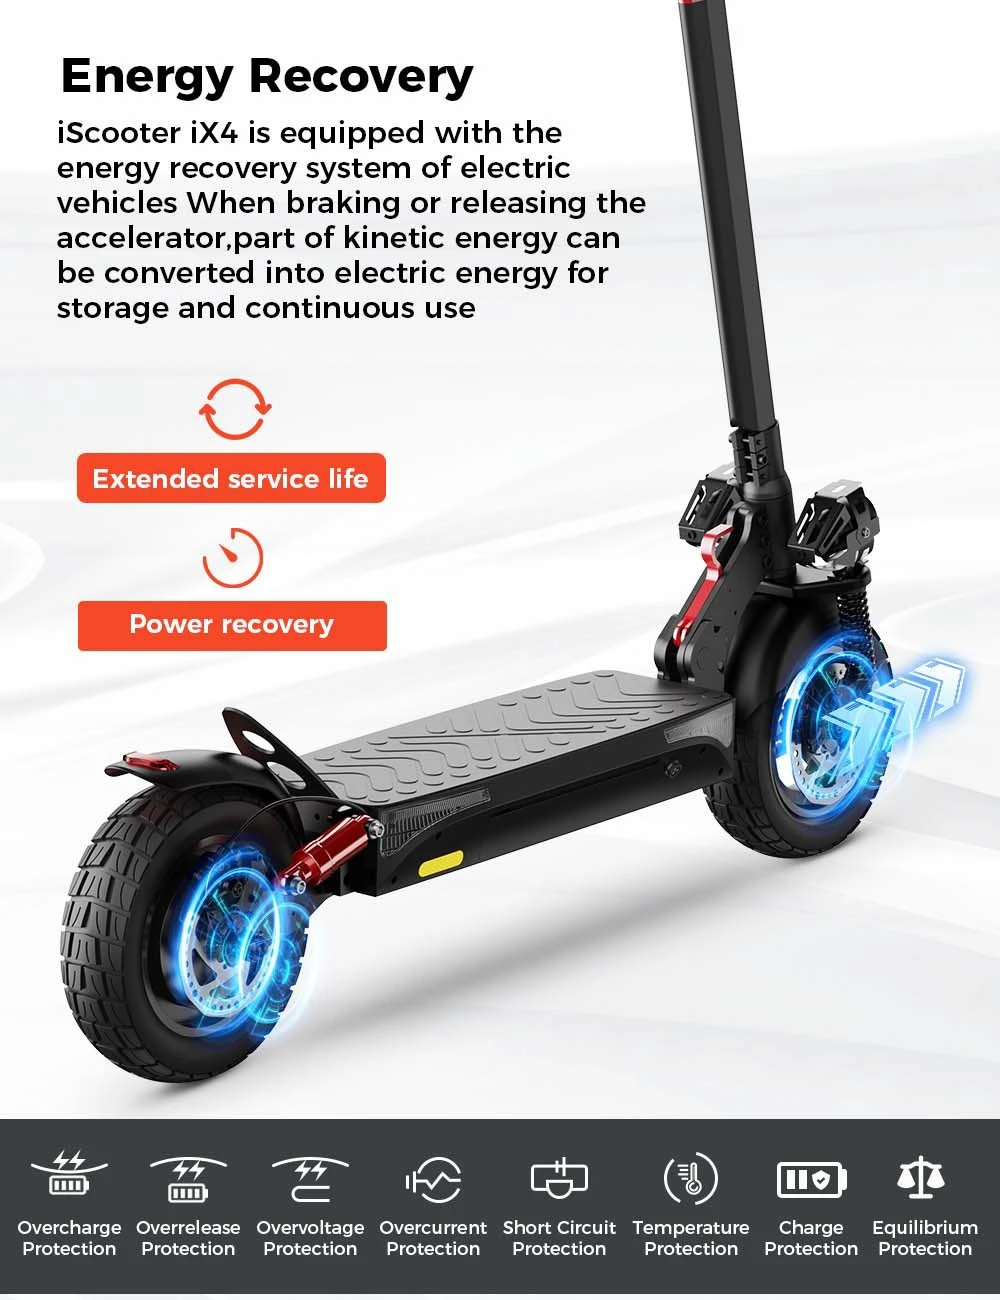 https://img.gkbcdn.com/d/202303/iScooter-IX4-Electric-Scooter-10---Honeycomb-Tires-519918-15._p1_.jpg